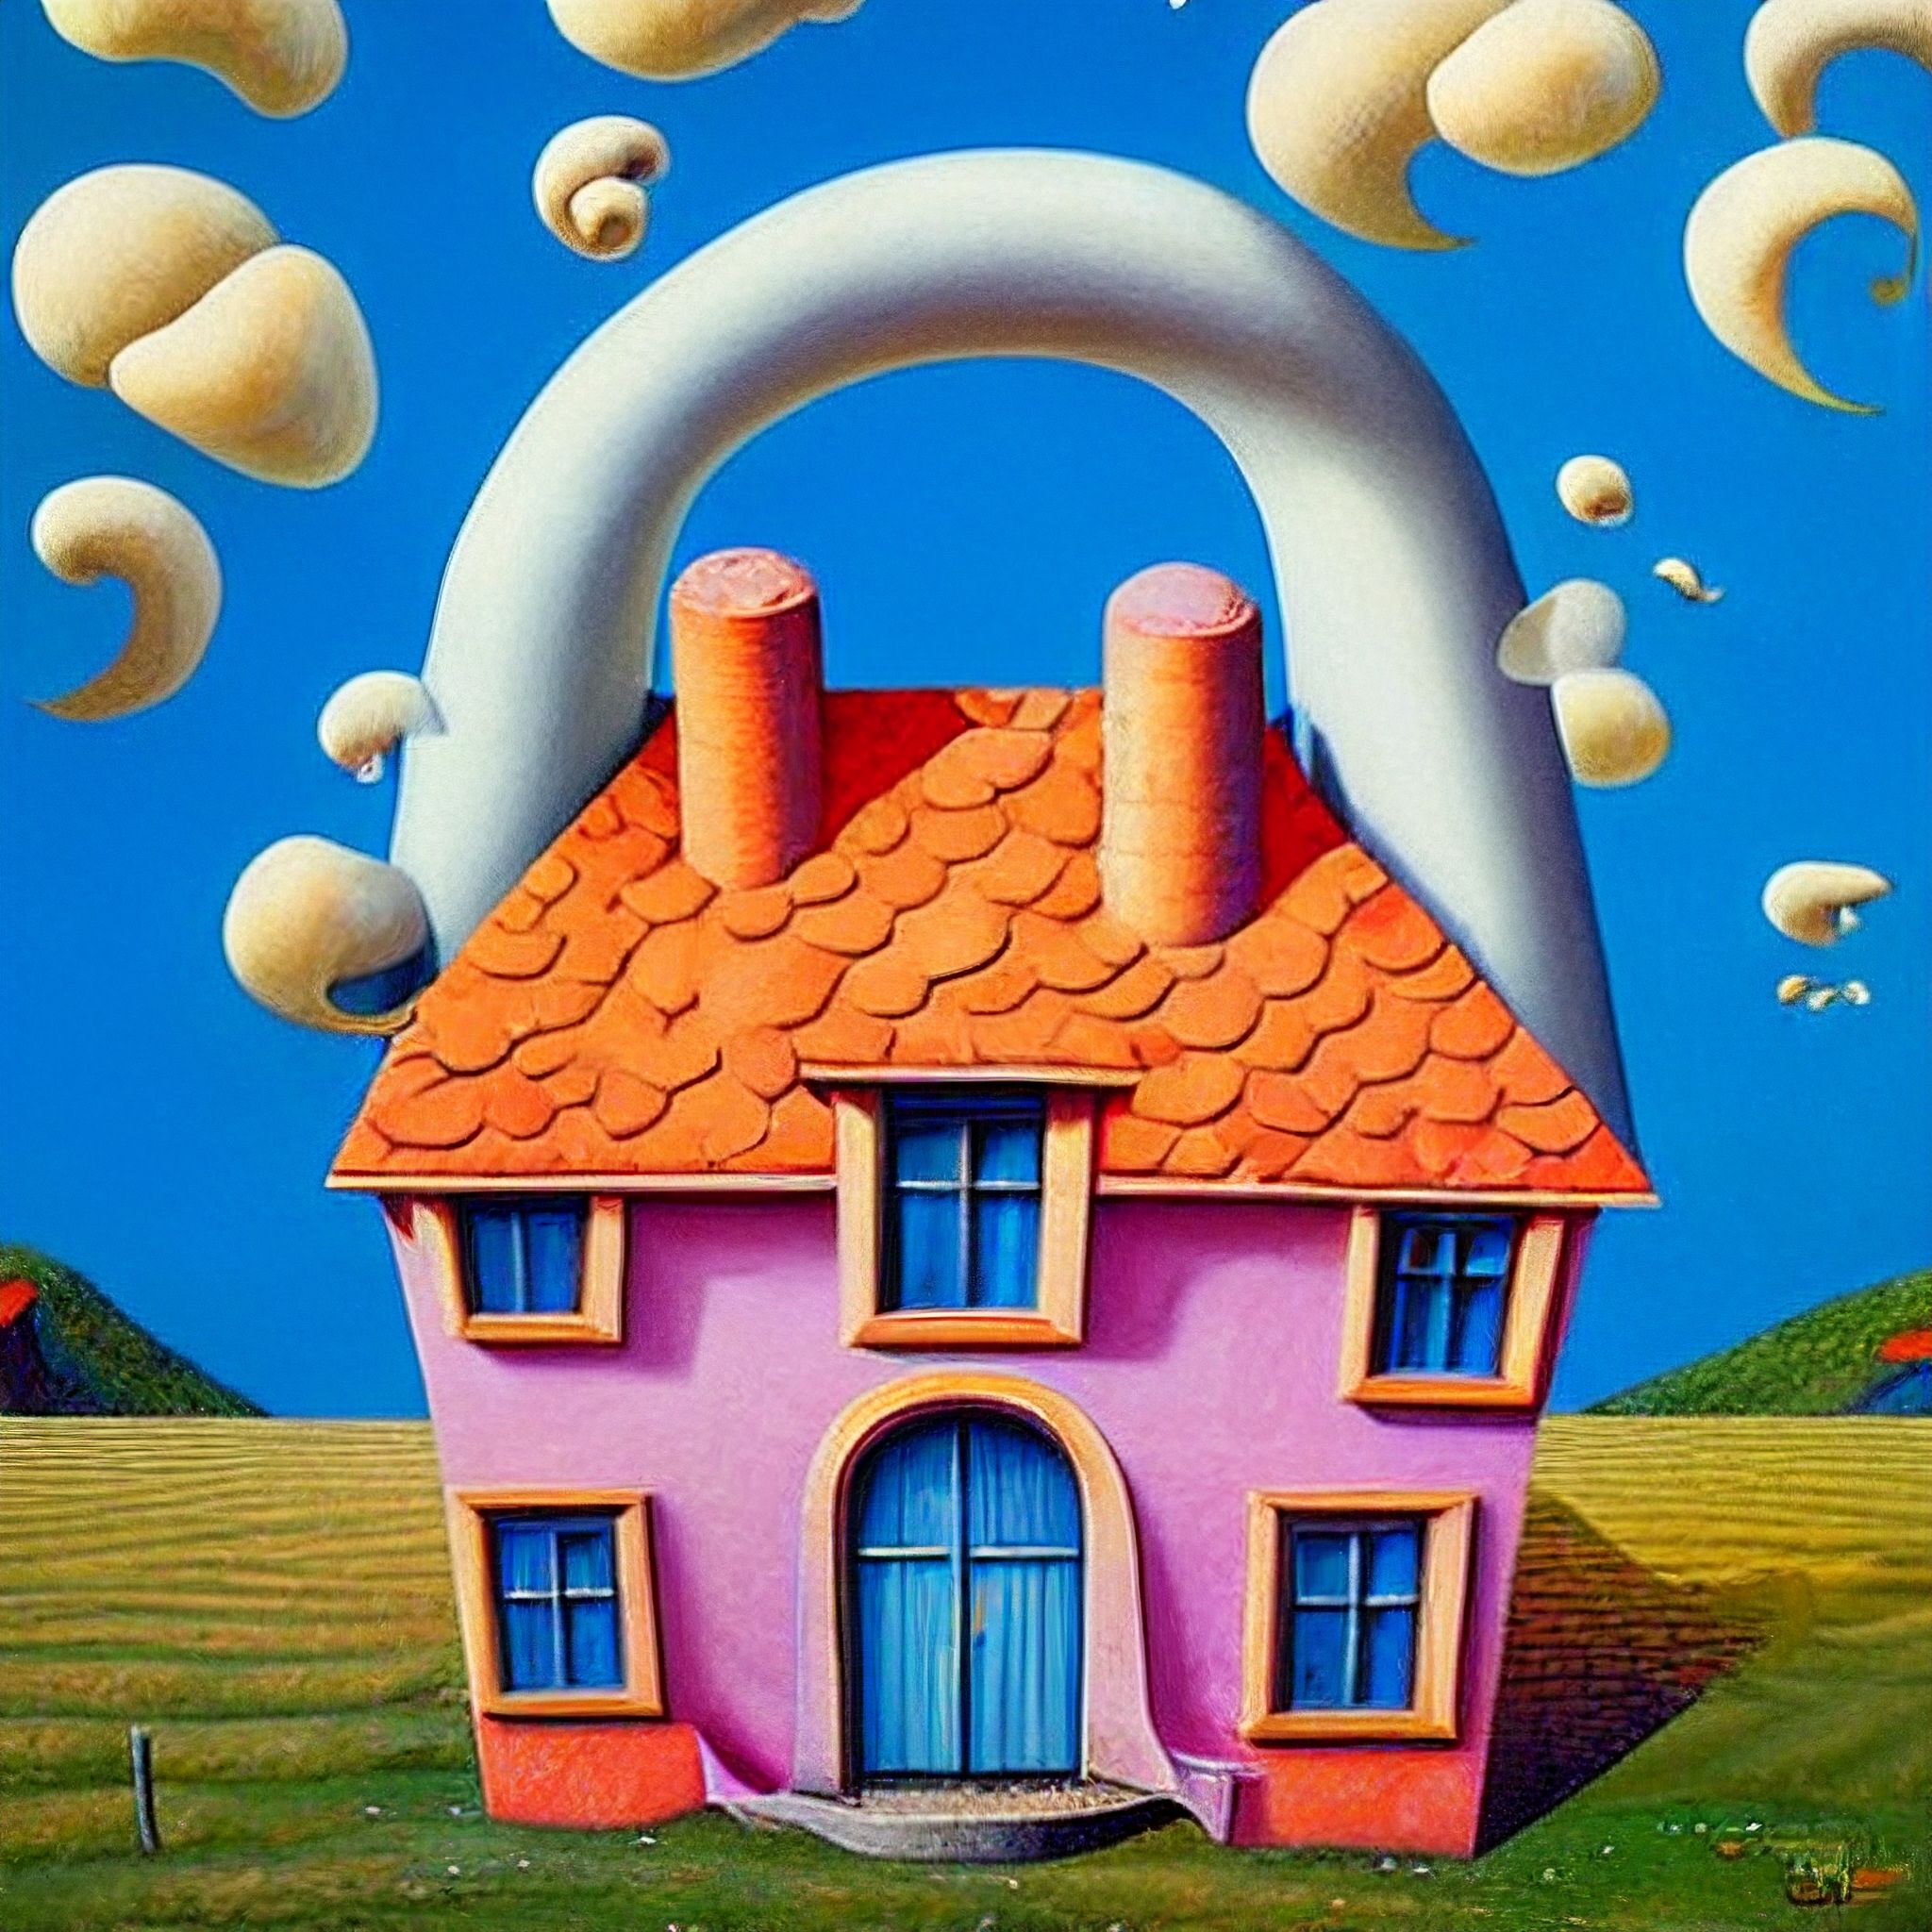 #14 The Cloud Monster and the Pink House